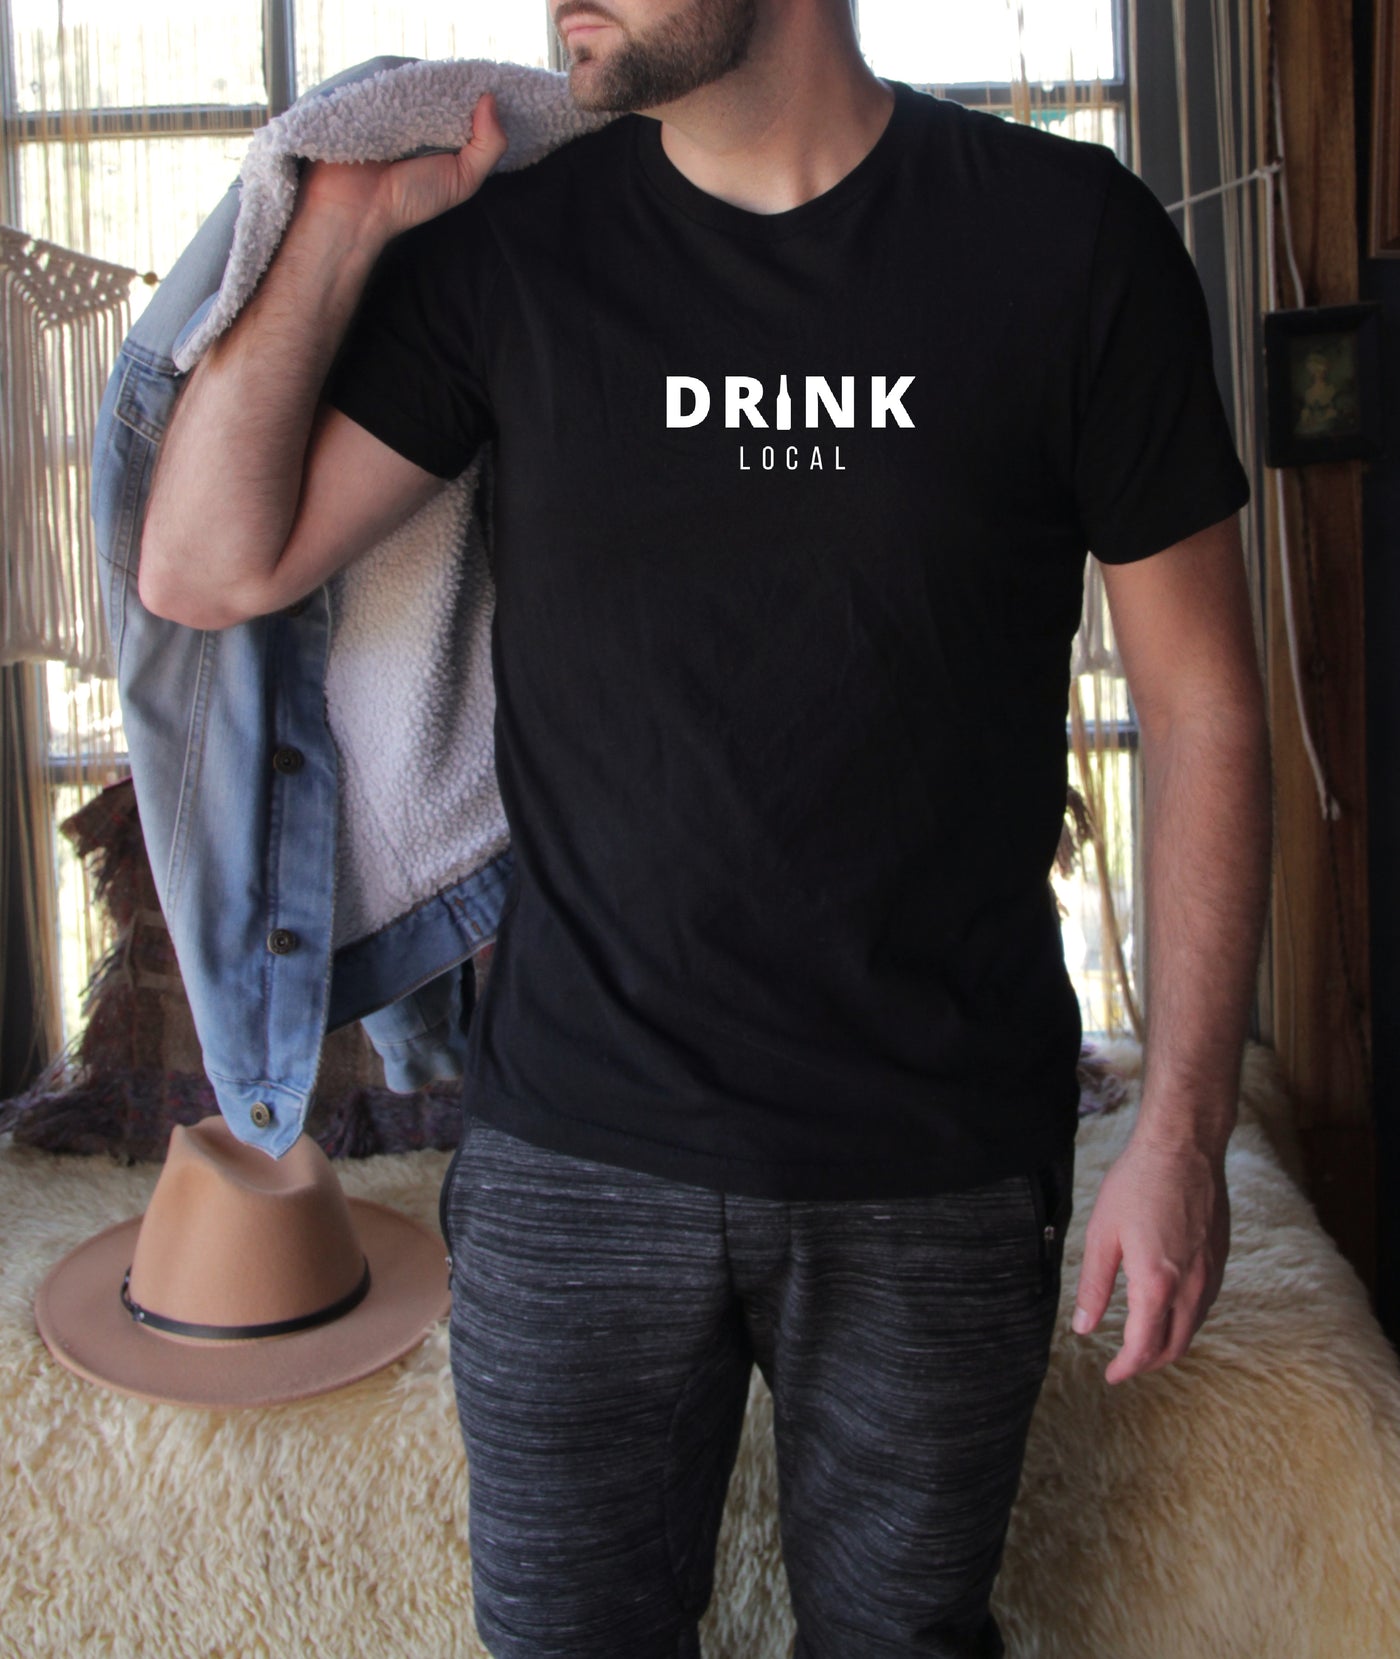 "Drink Local" T-Shirt